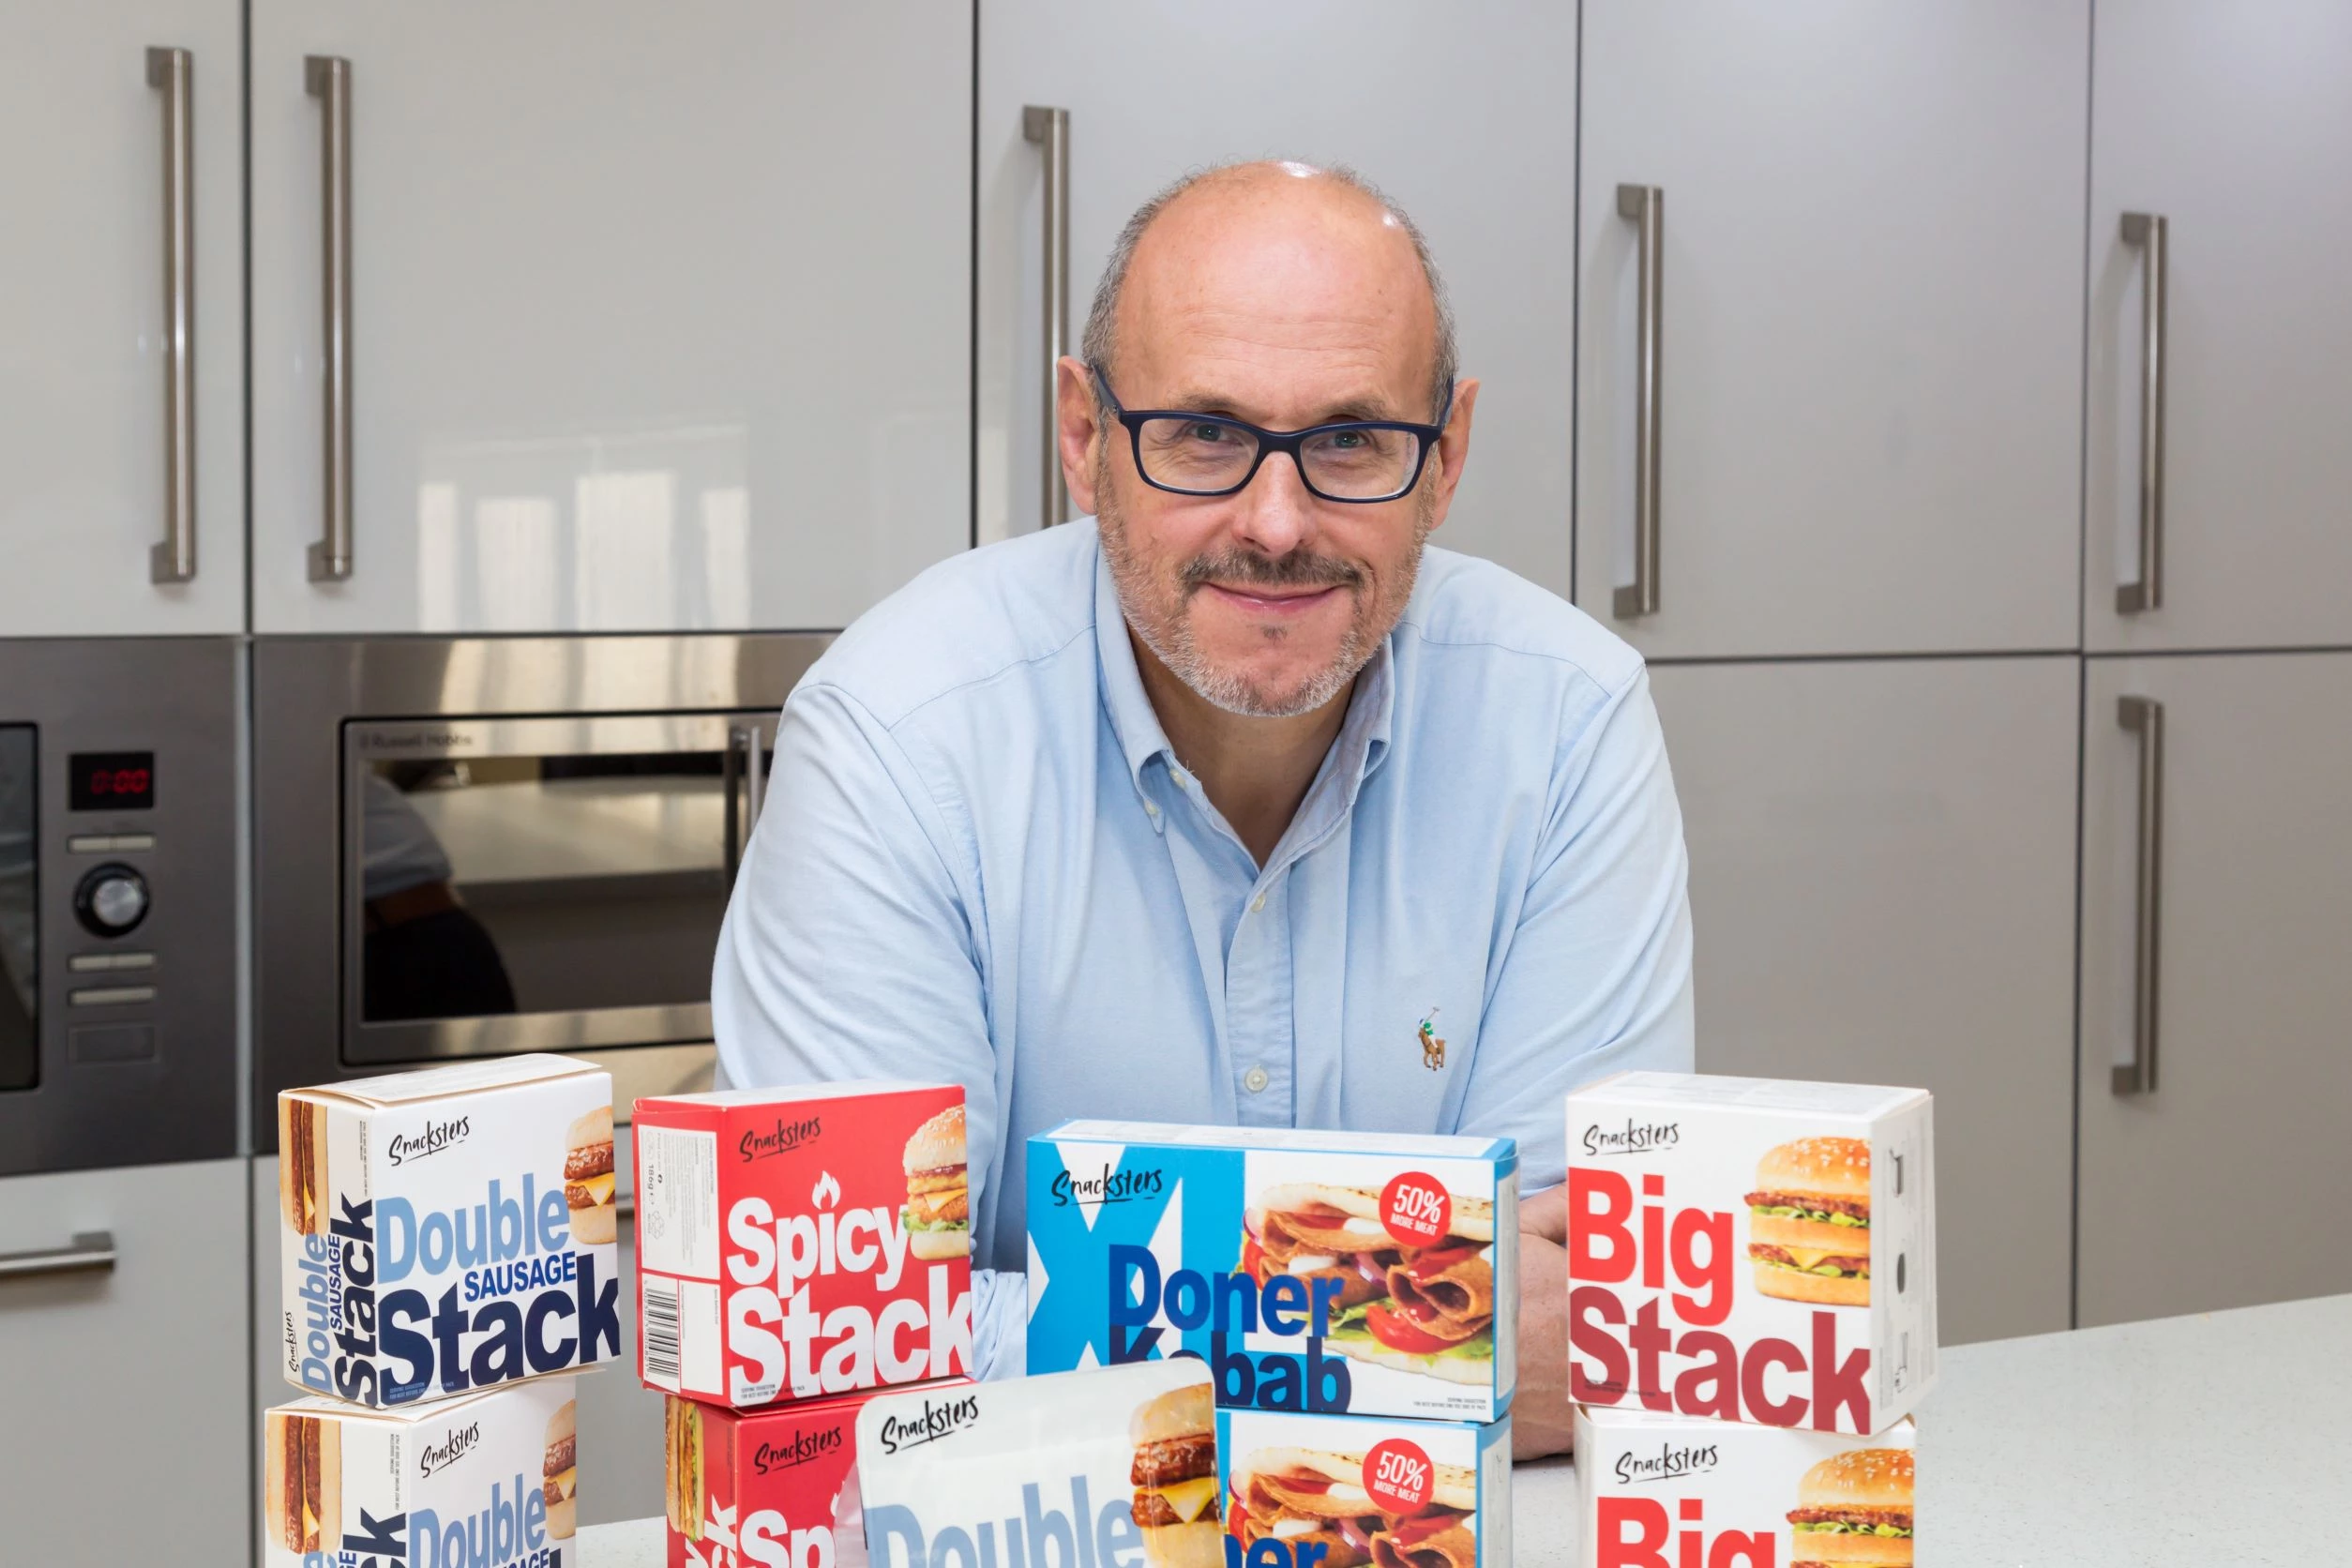 Andrew Hayes, CEO of Abbeydale Food Group